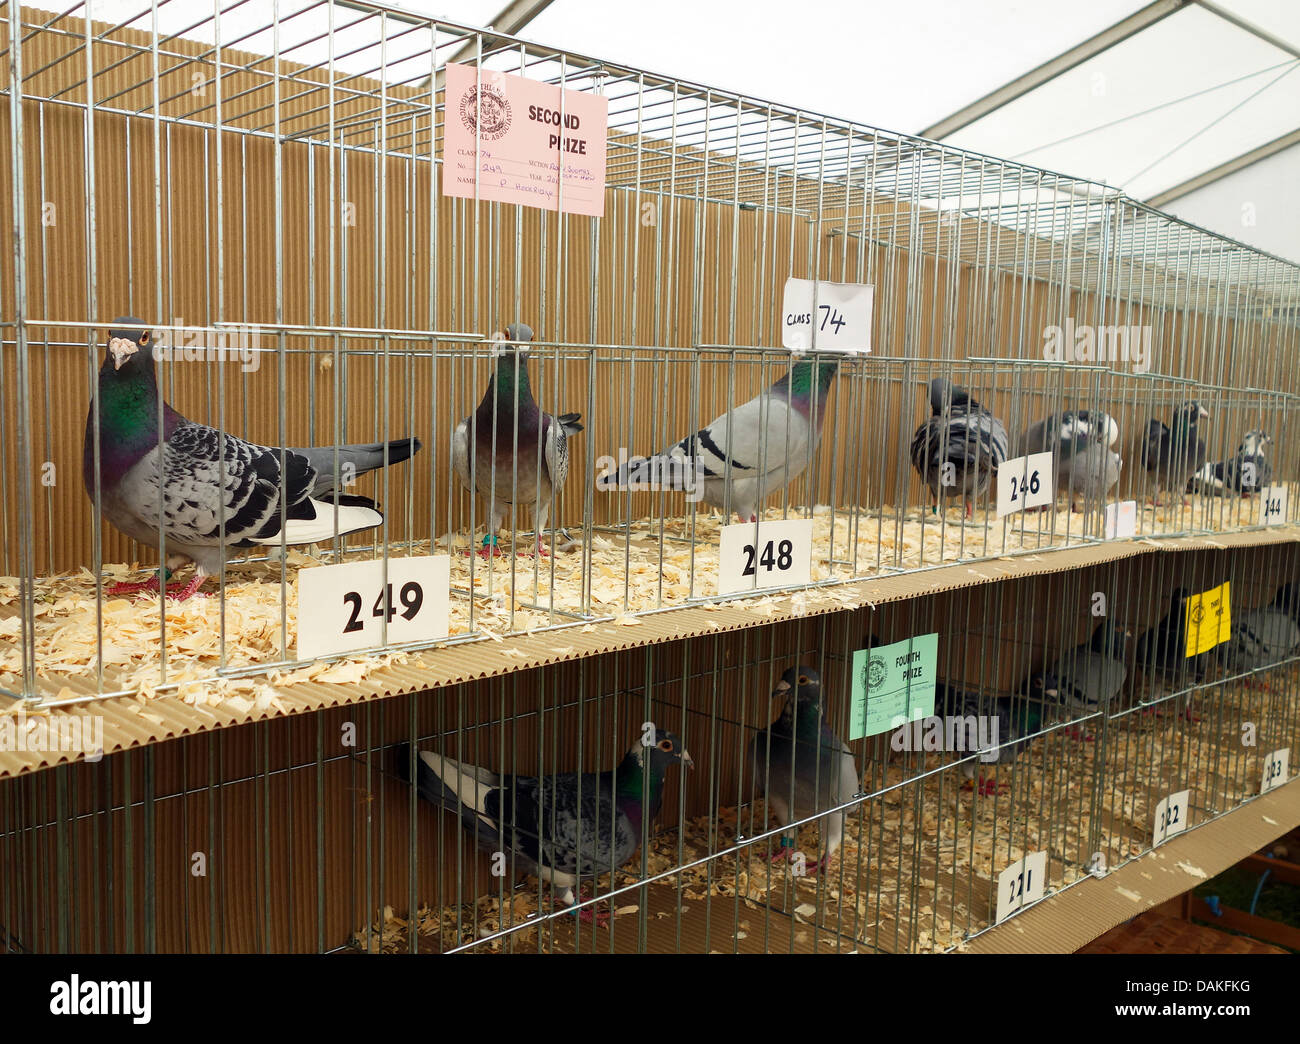 The homing pigeon section at the Stithians farming and agricultural show in Cornwall, UK Stock Photo